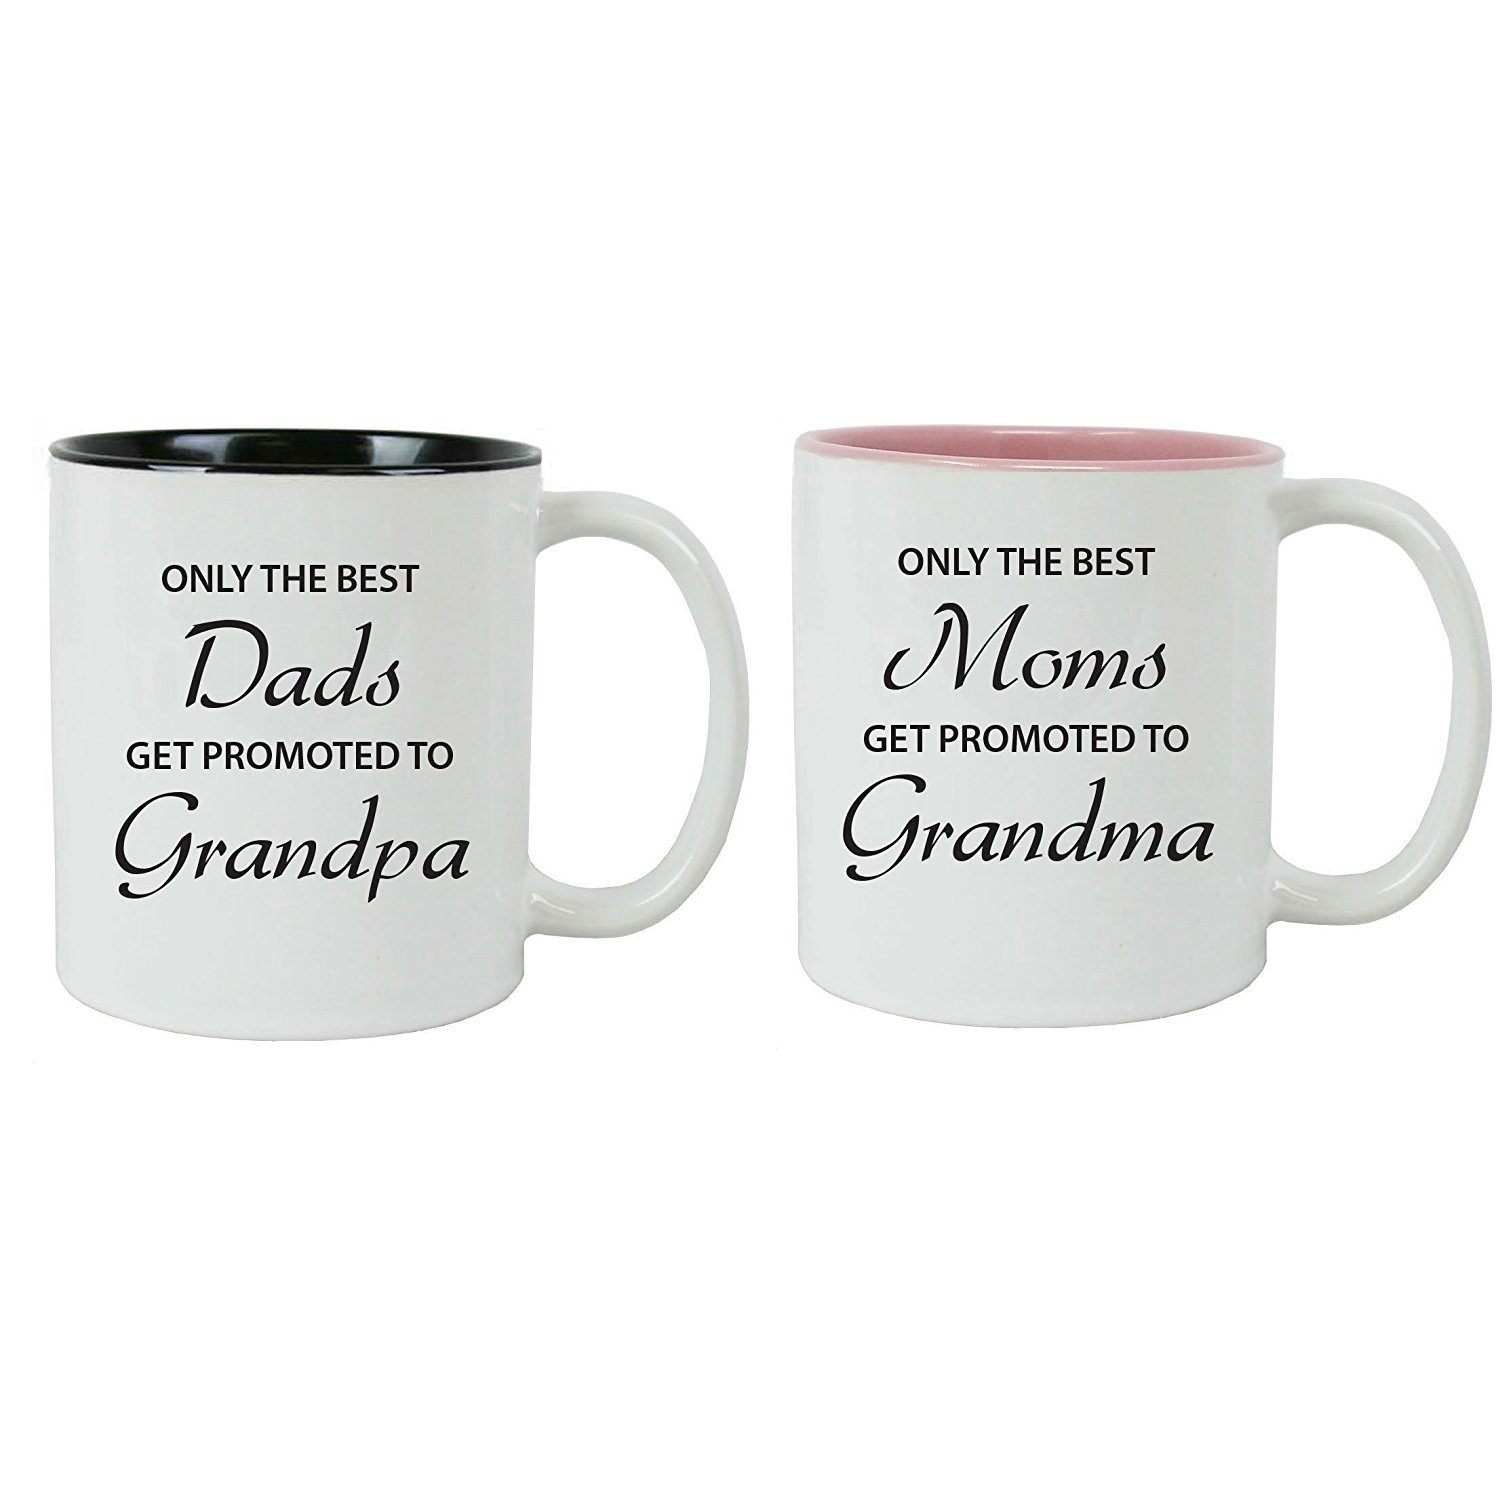 New Grandfather Gift Ideas
 Best Gifts For Grandparents Reviews of 2019 at TopProducts